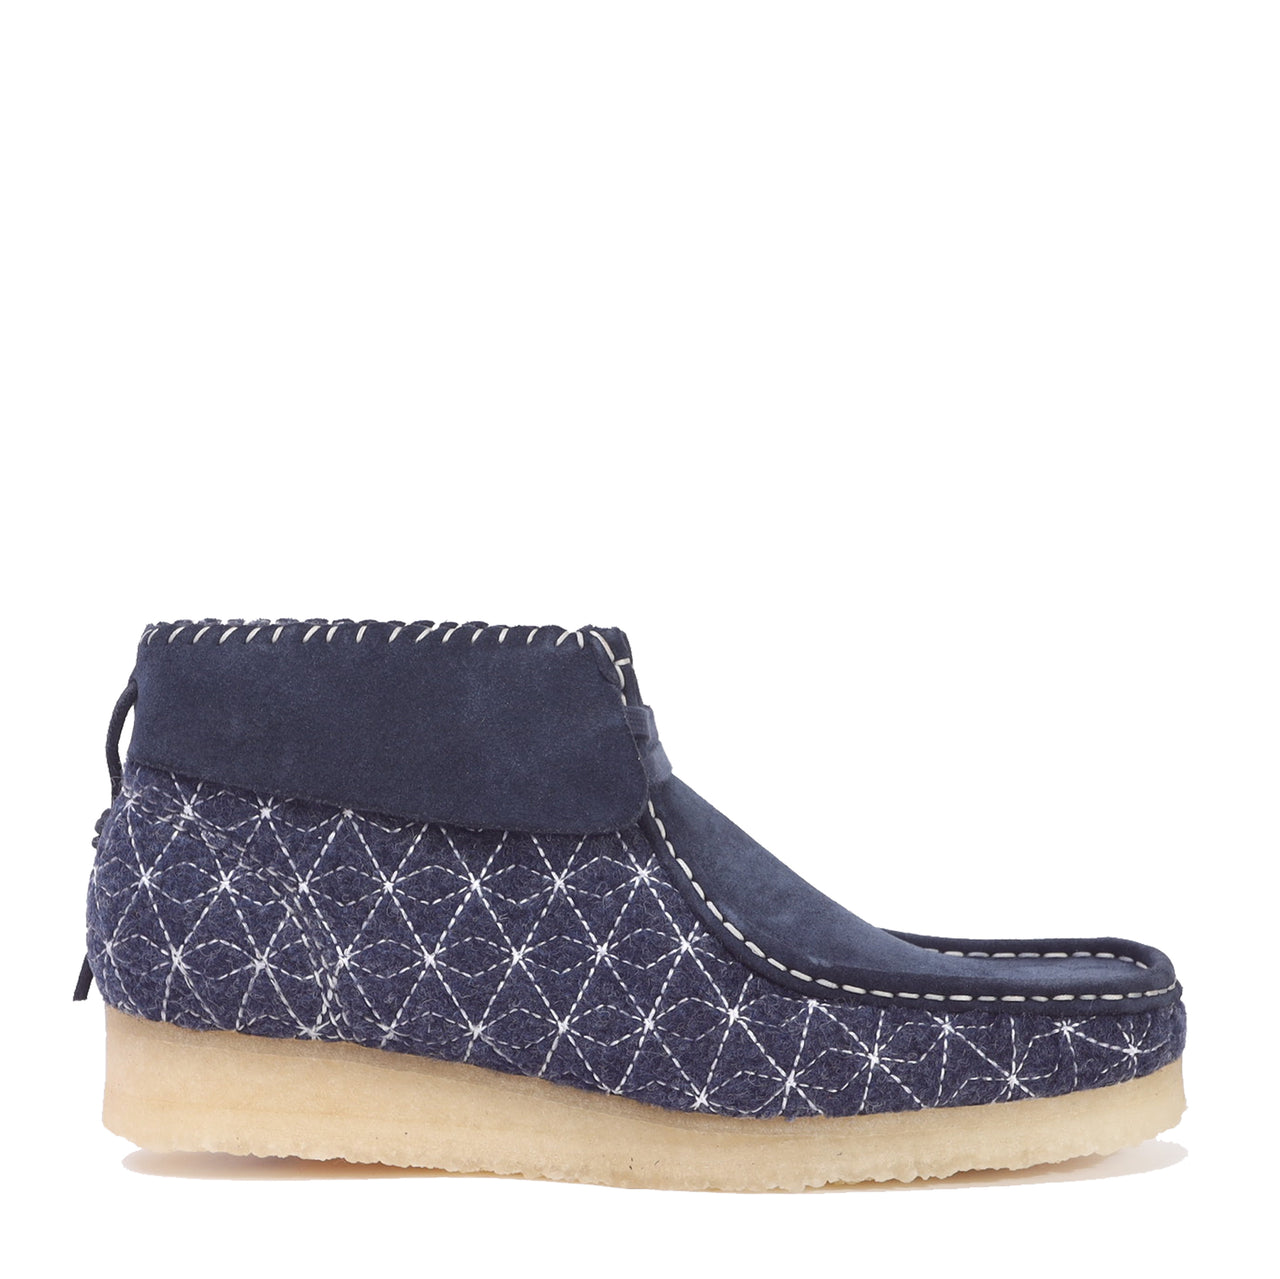 WMNS WALLABEE BOOT